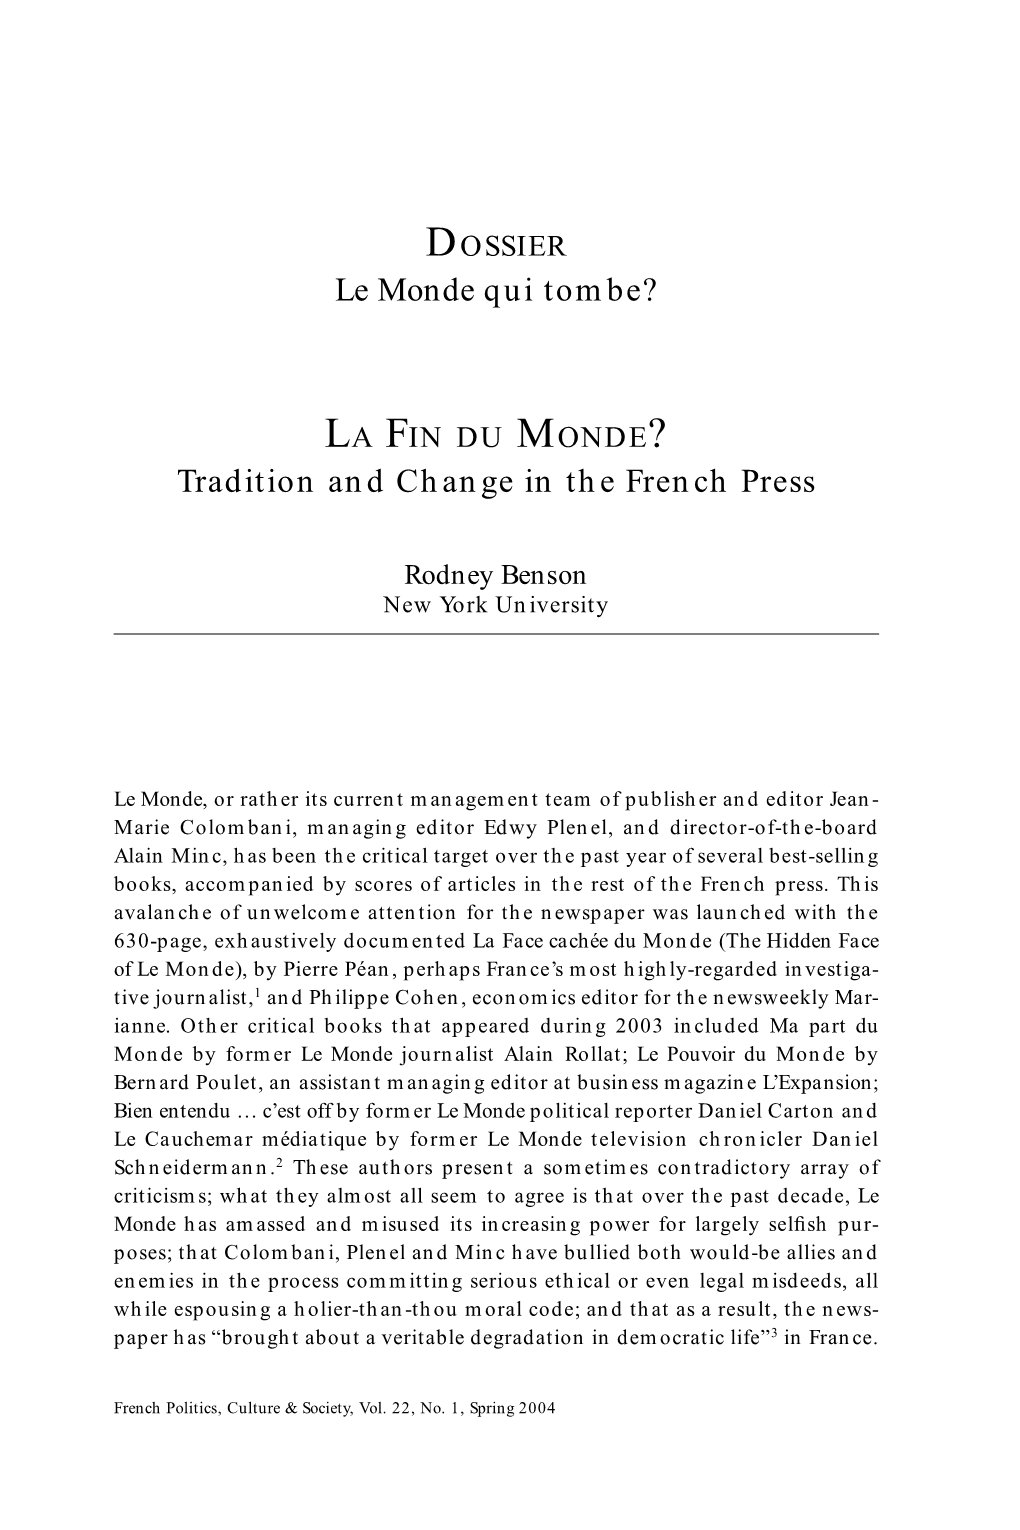 LA FIN DU MONDE? Tradition and Change in the French Press